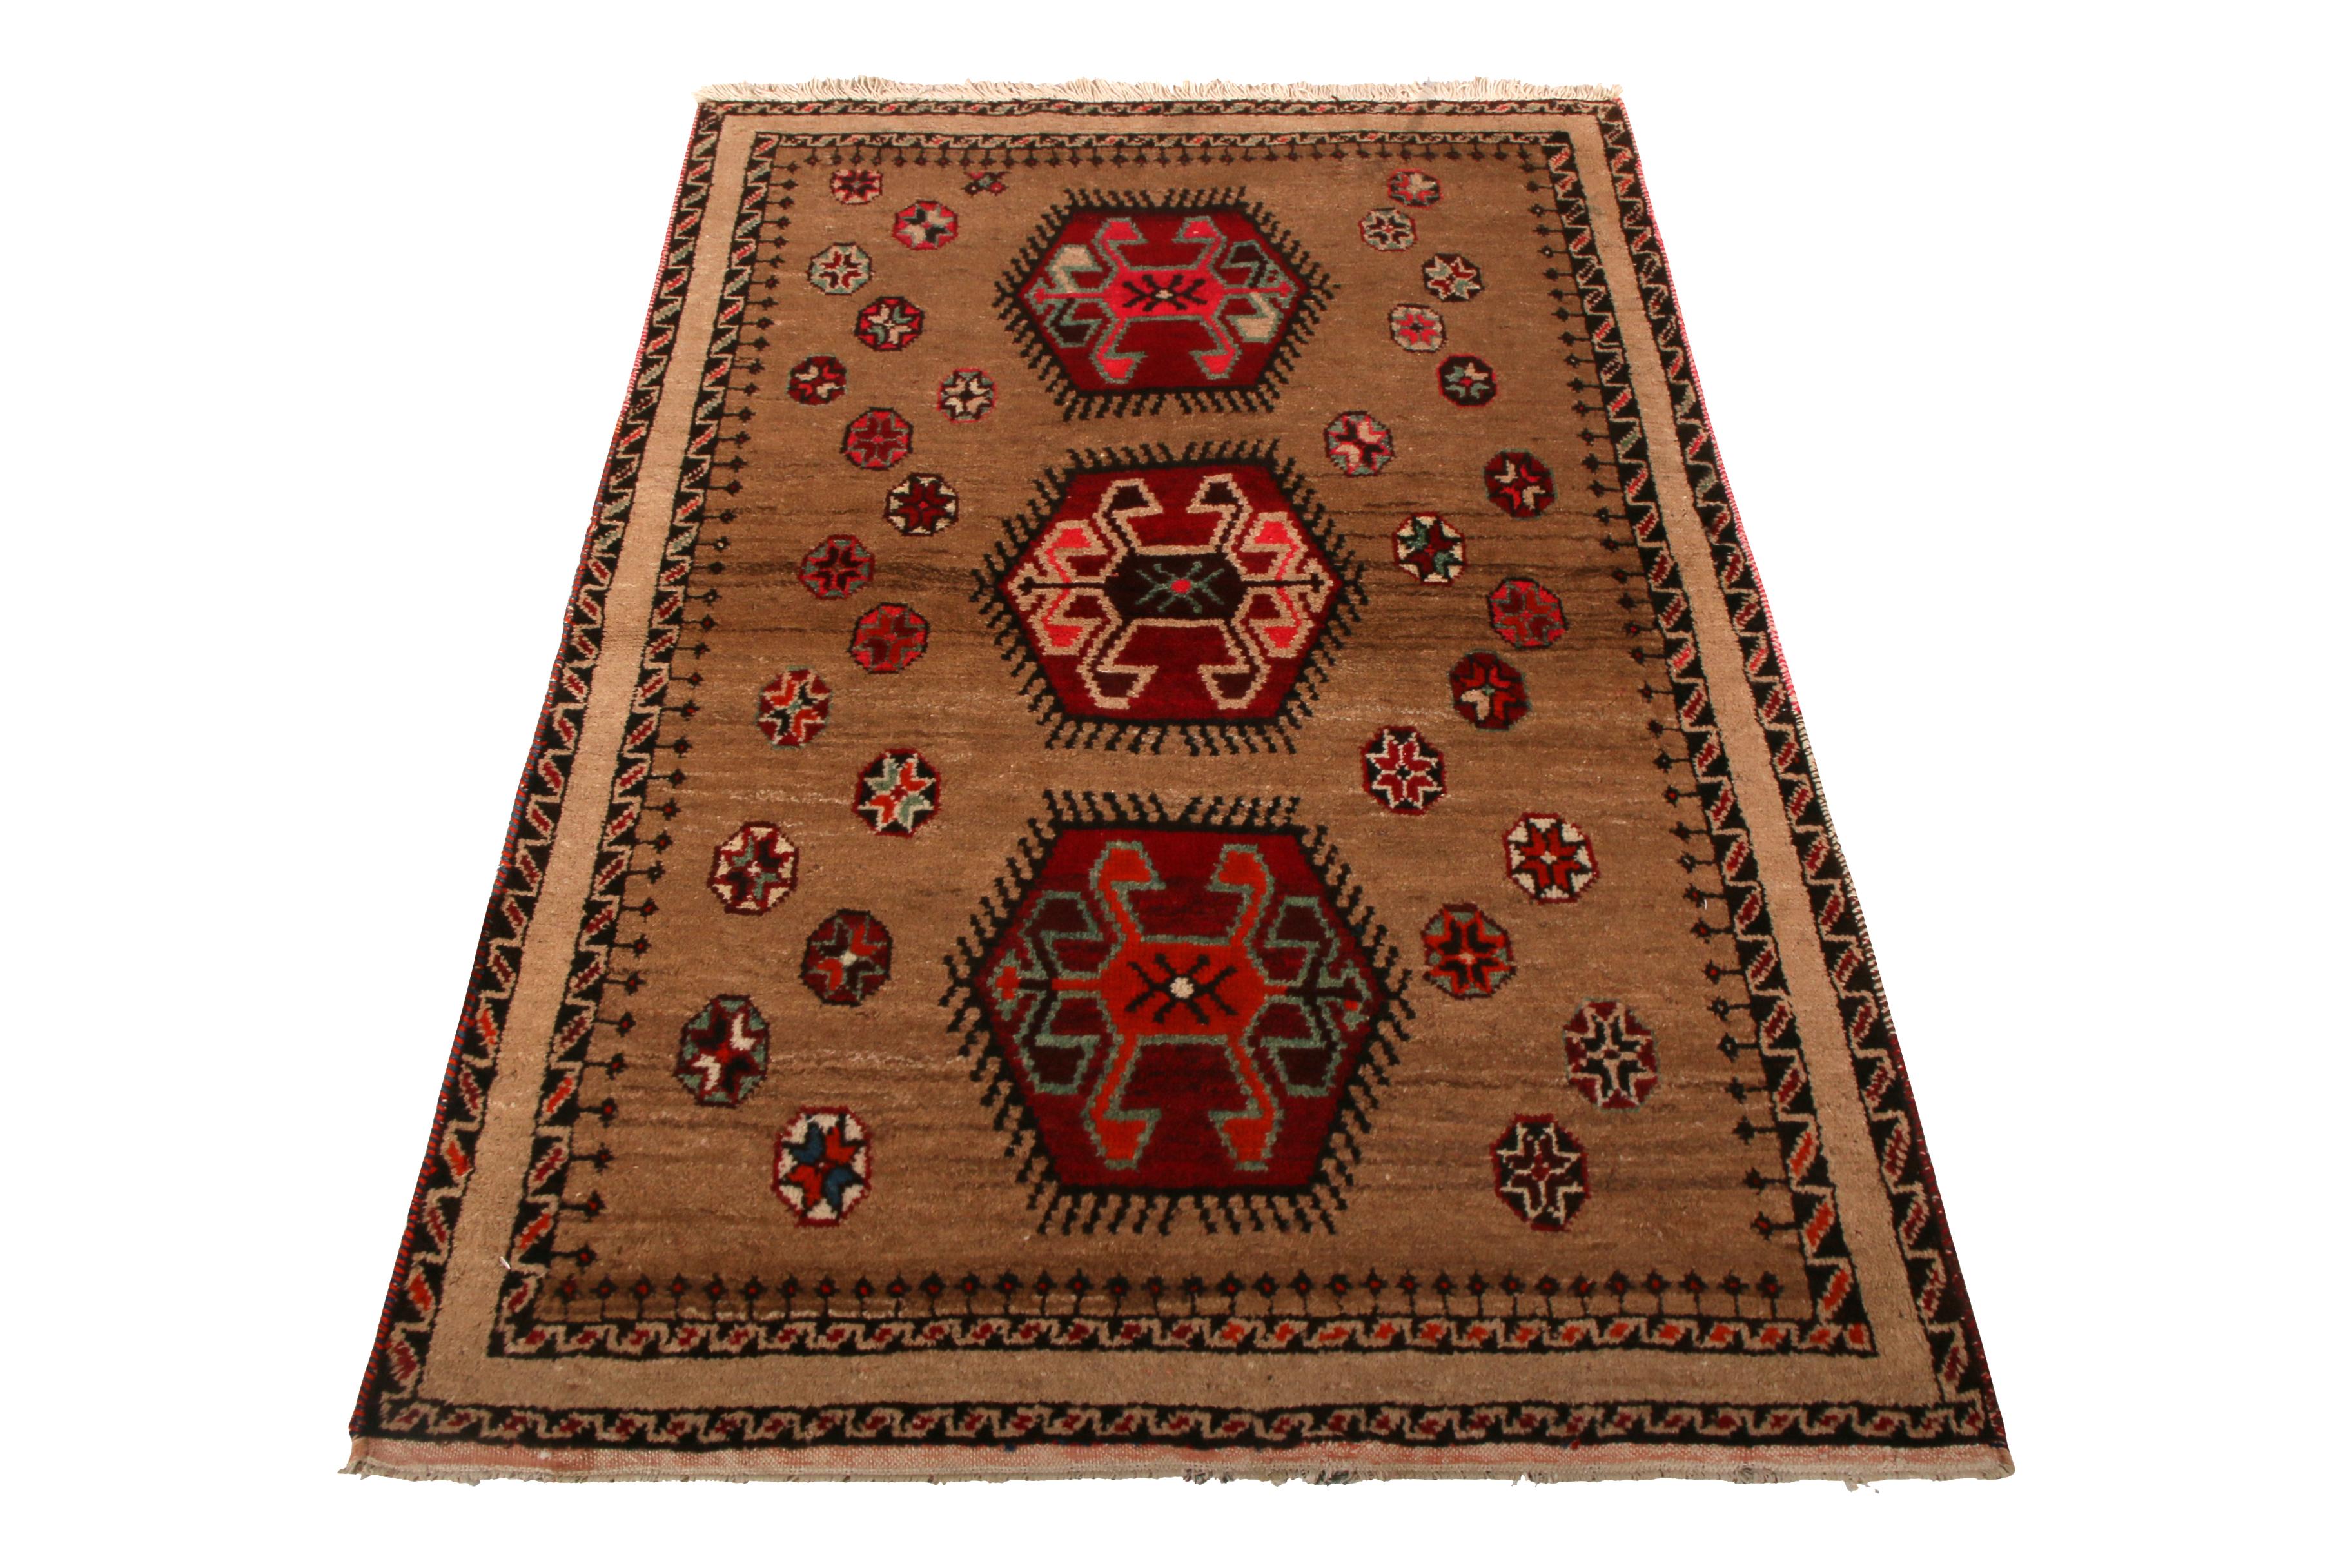 Made in hand-knotted wool originating between 1950-1960, this vintage mid-century Gabbeh Persian rug enjoys a rich transitional take on classic tribal elements in a versatile size. The juxtaposition of the symmetry and whimsy in the medallions